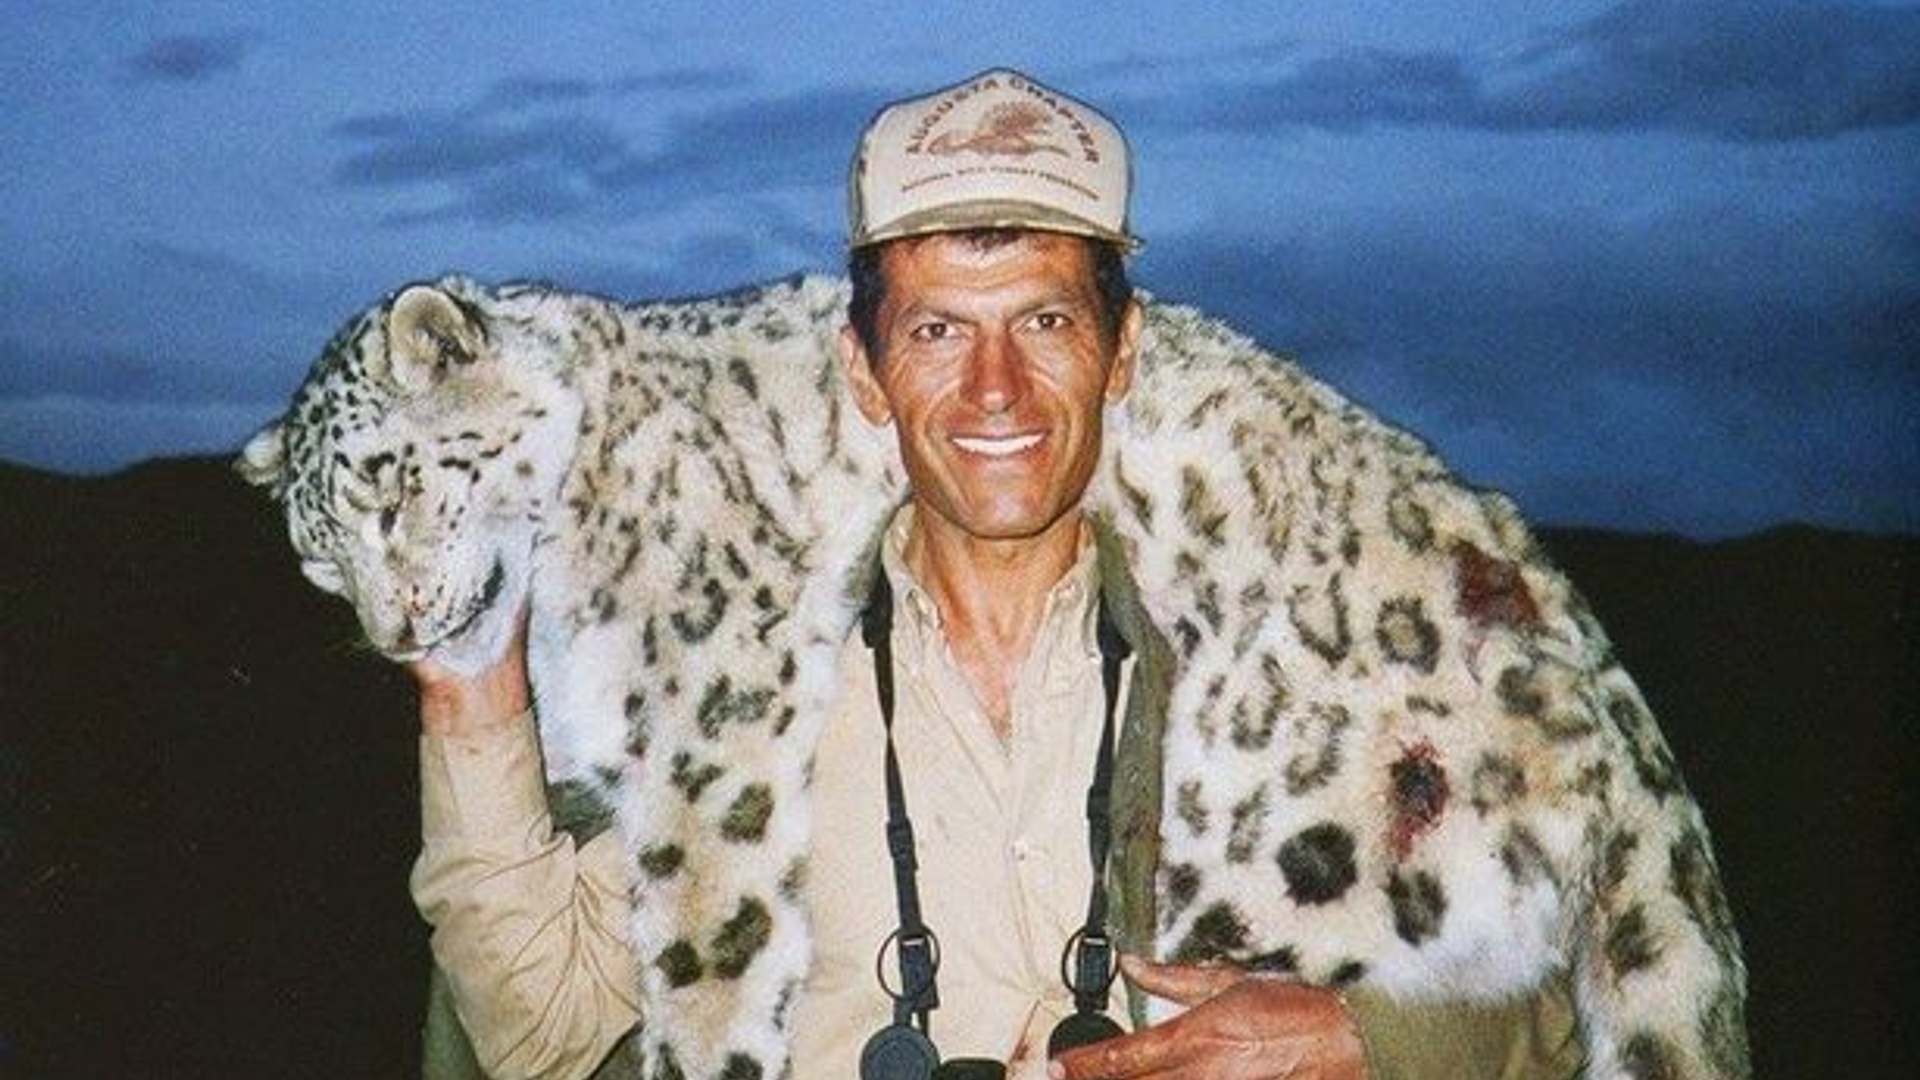 Bring-Hossein-Soudy-Golabchi-the-US-Snow-Leopard-TROPHY-HUNTER-to-justice